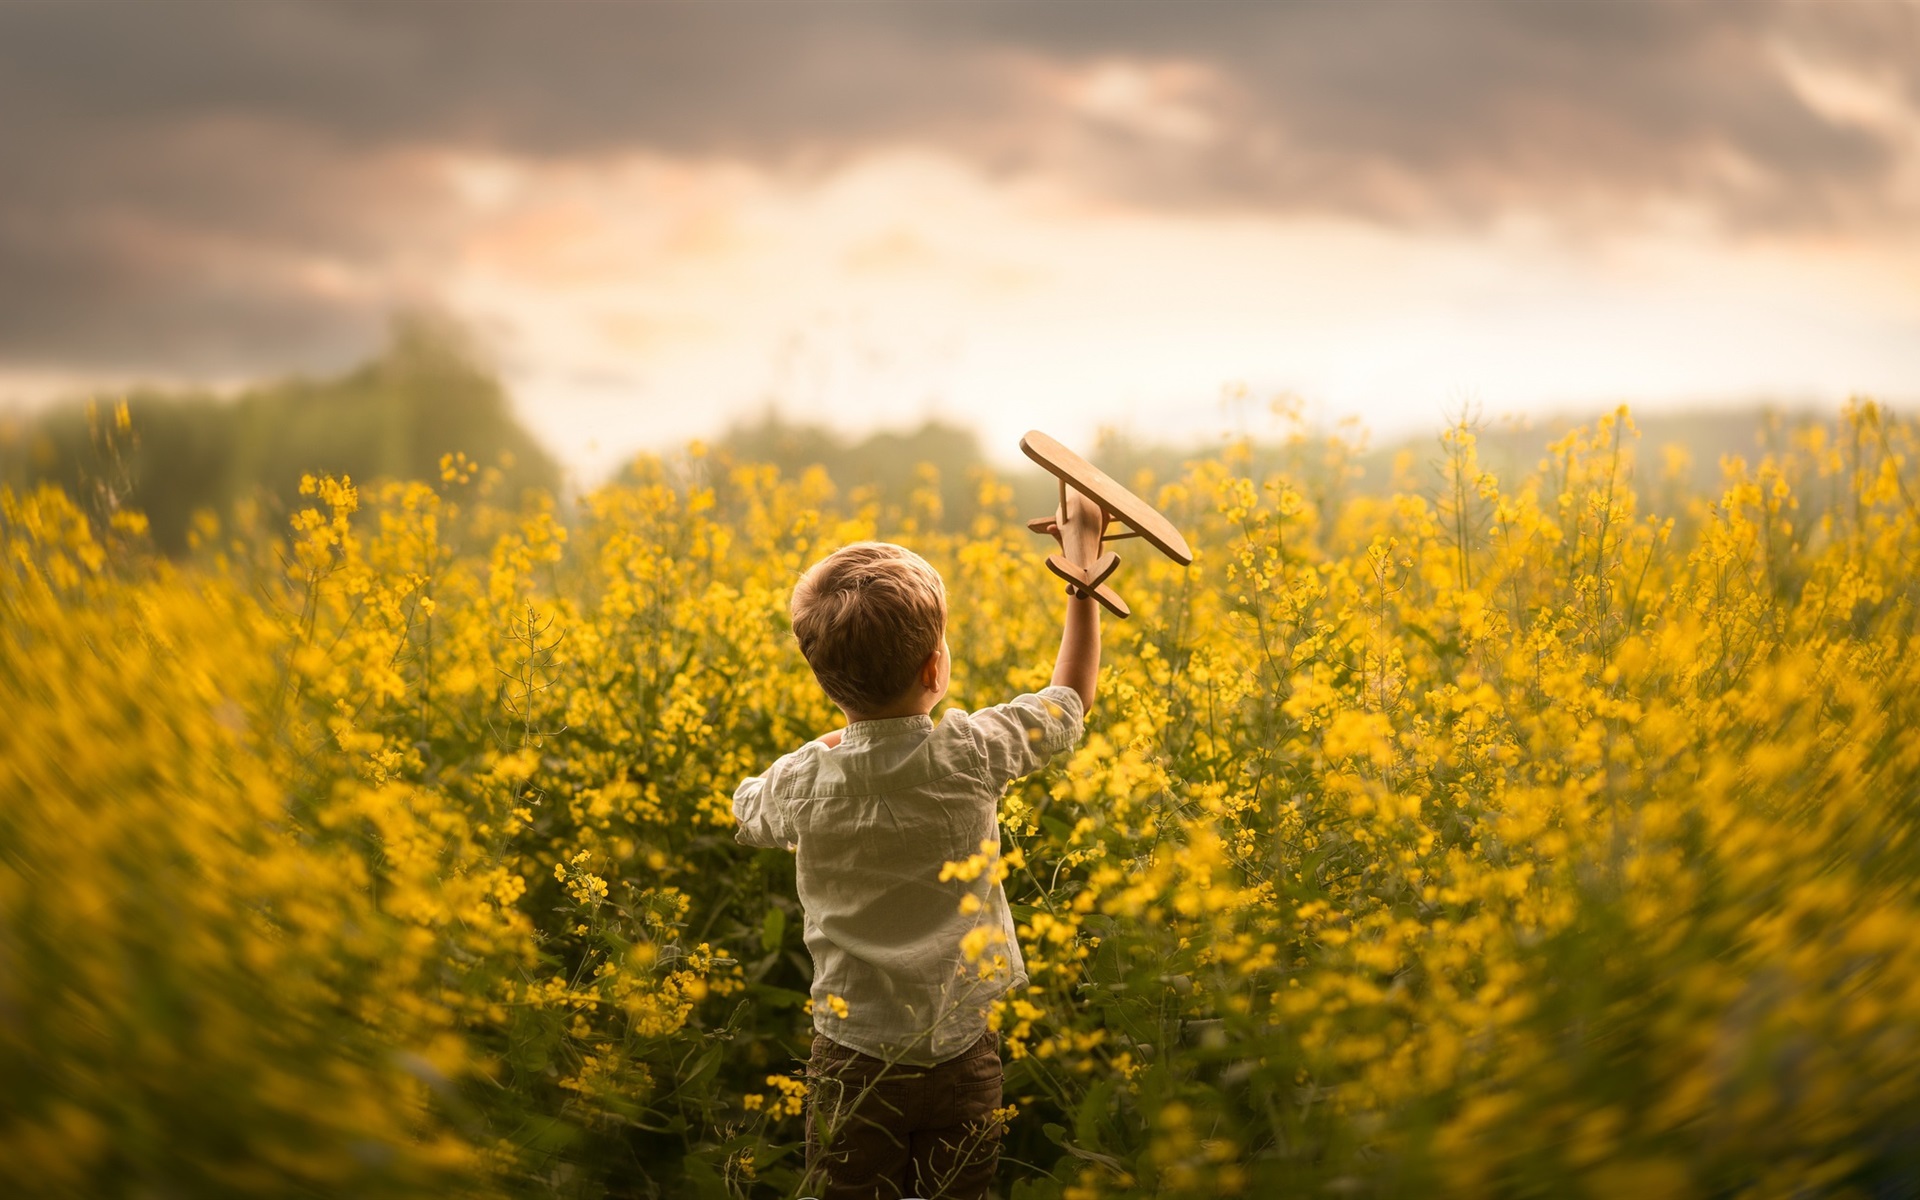 Child-little-boy-play-toy-plane-in-the-rapeseed-flowers-field_1920x1200